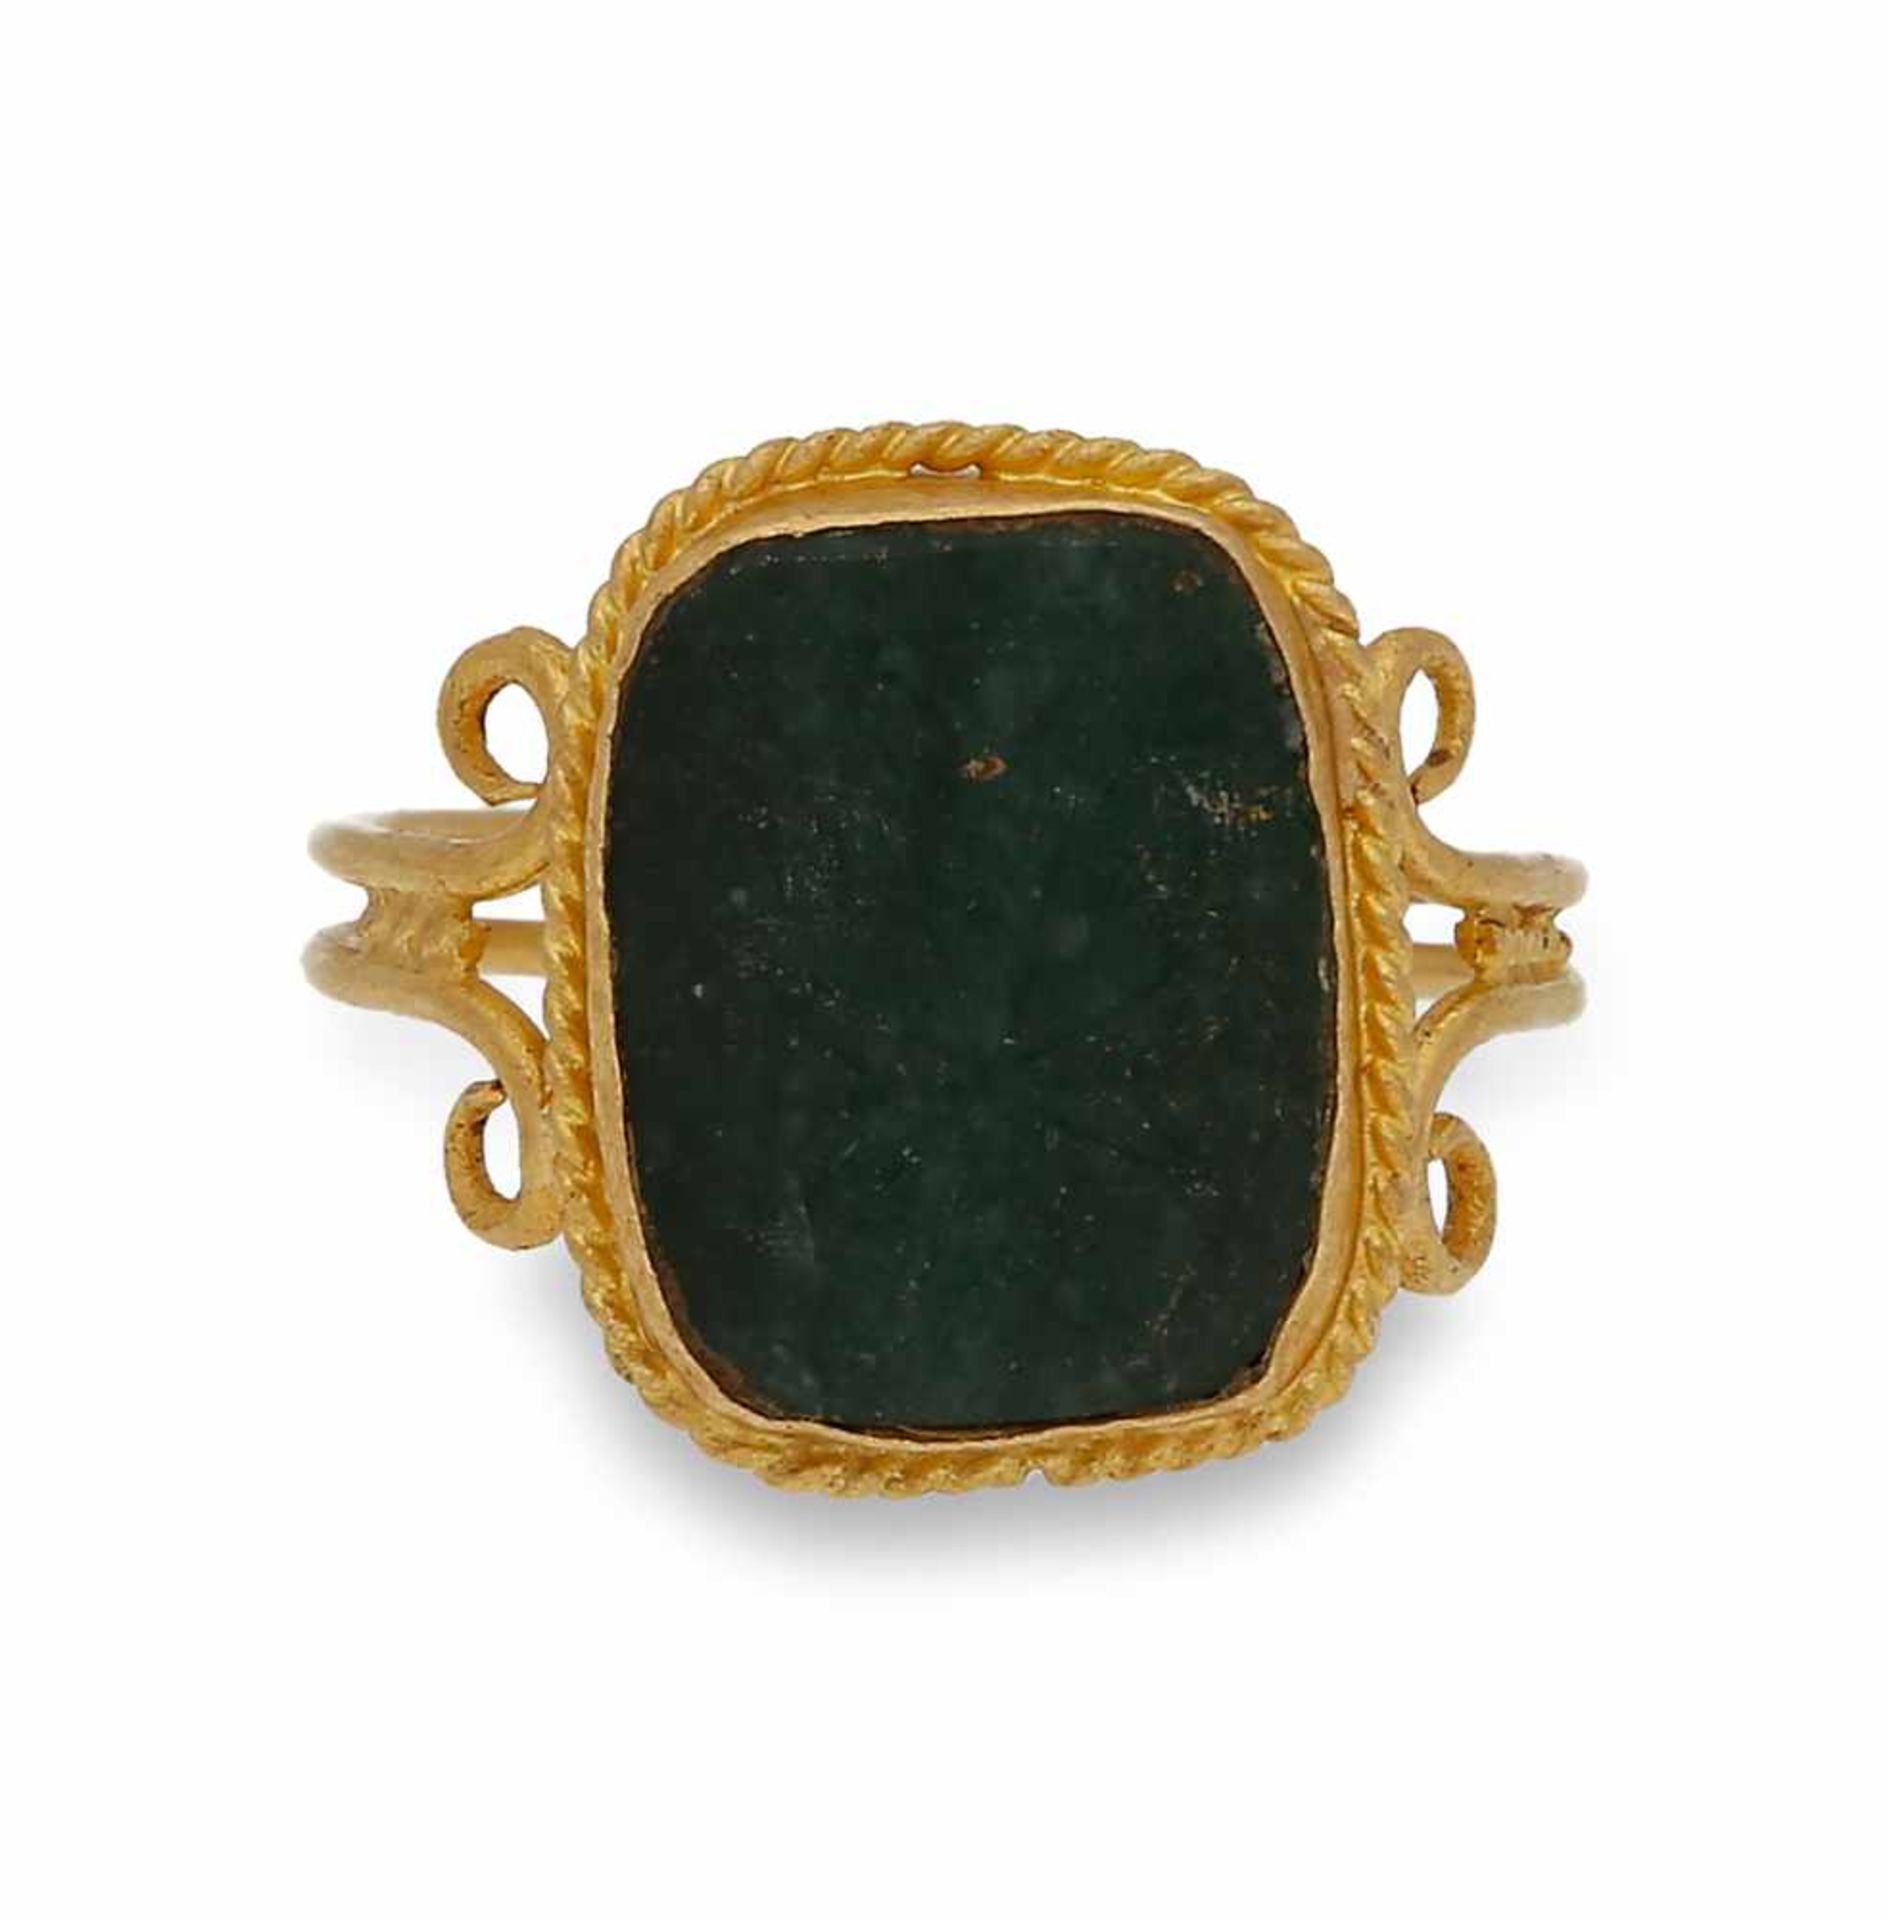 Jasper ring, early 19th Century.Gold, probably 22K, and carved jasper. 3.6 gr.